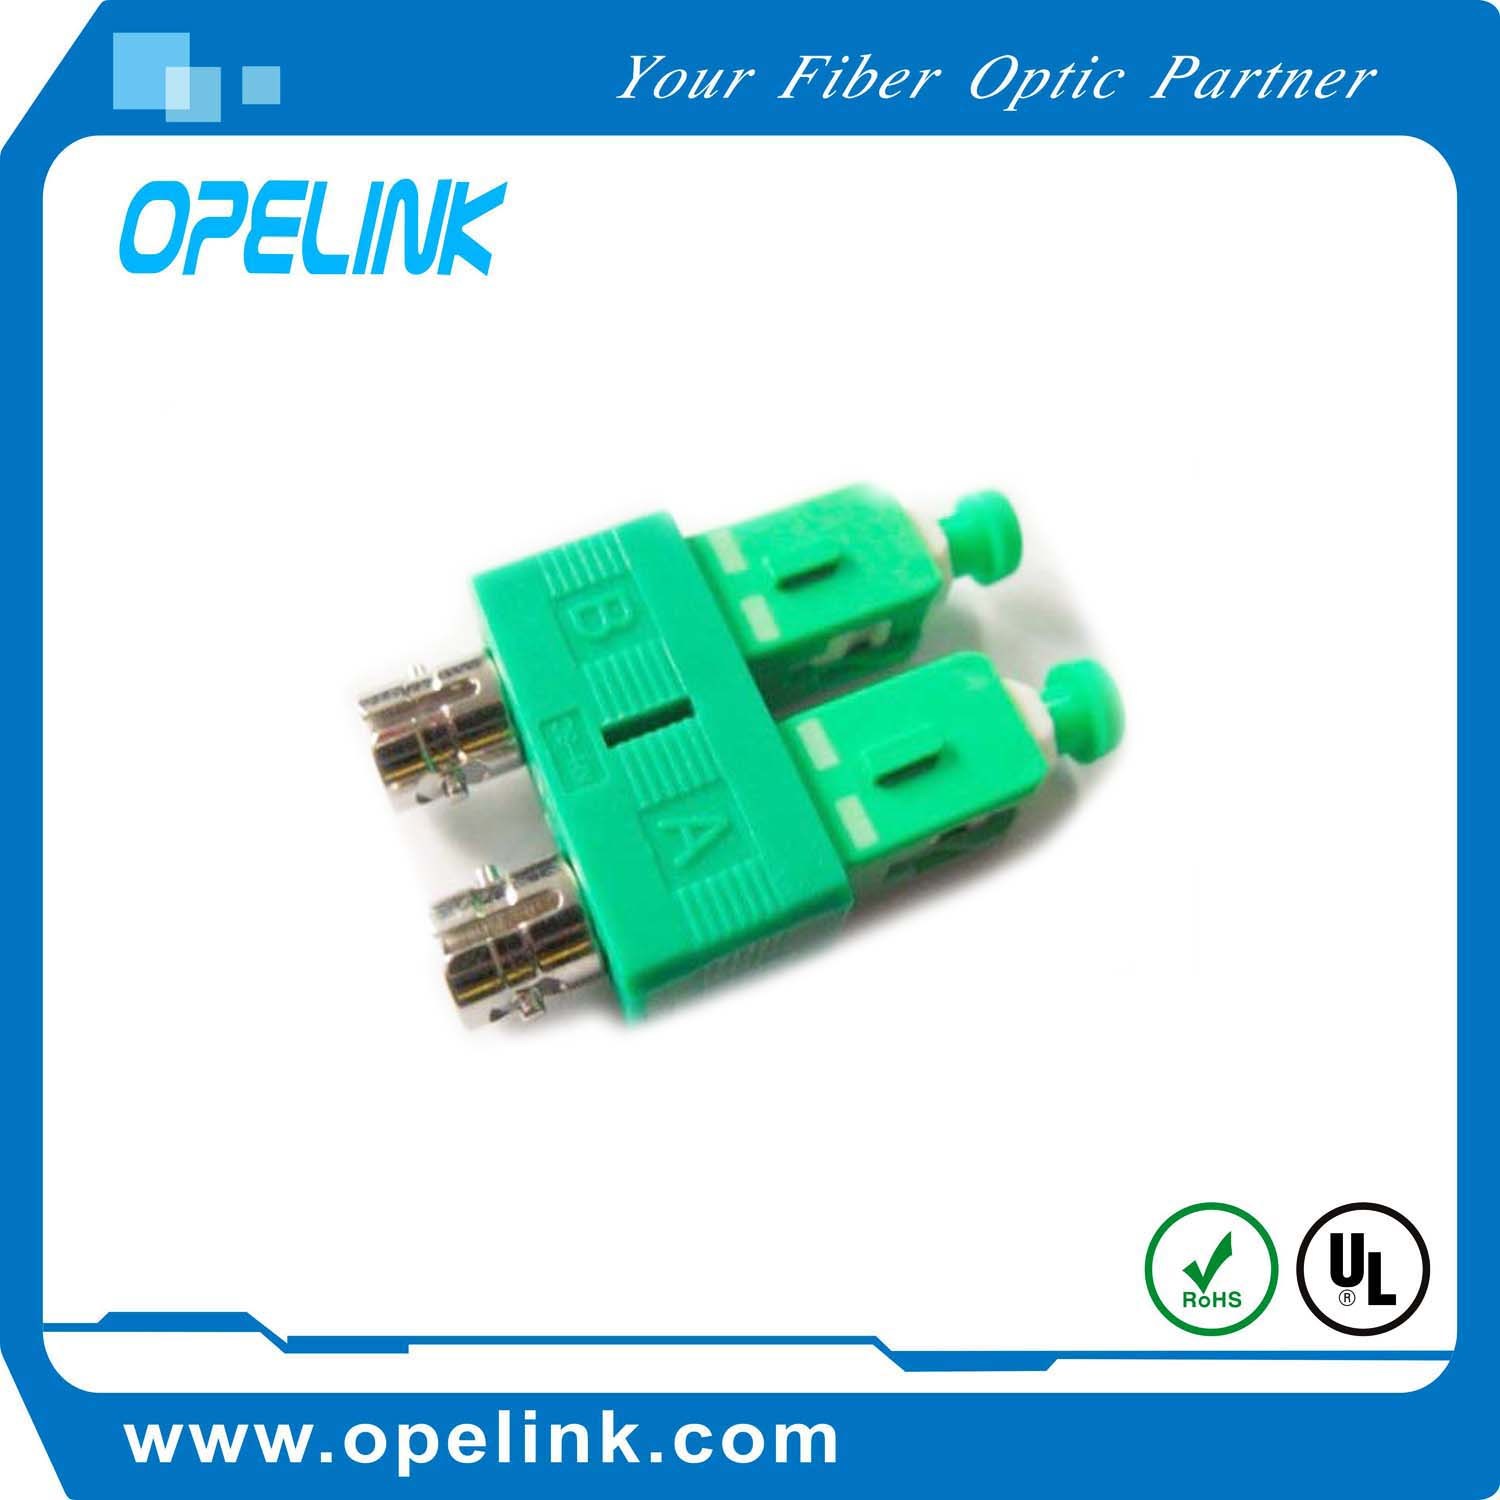   Fiber Optic Adapter Simplex Sm for Optical Cable